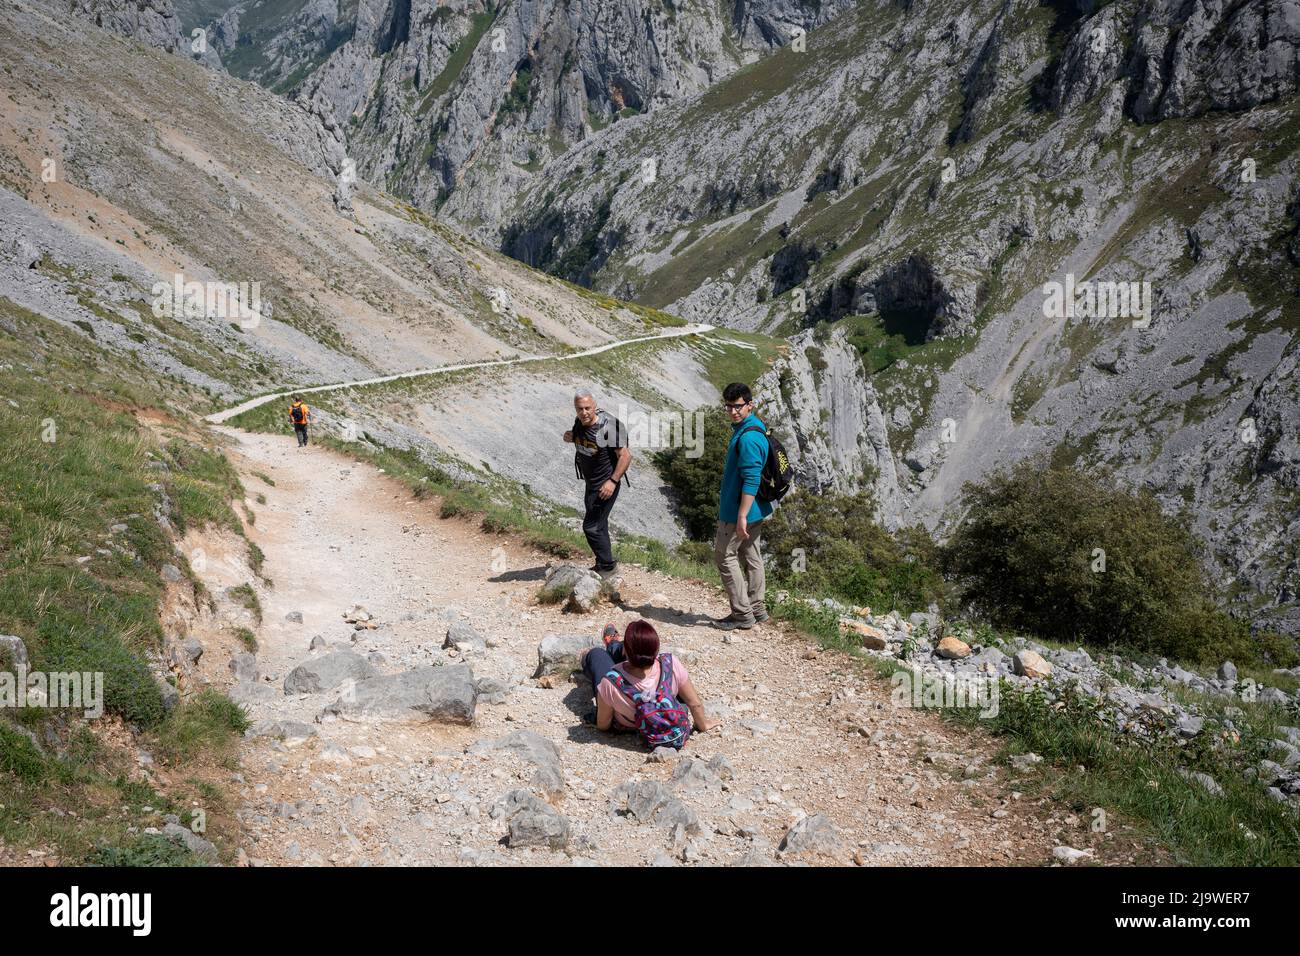 Fellow-walkers look at a woman who has tripped on stones in the Cares Gorge (Rio Cares), a major Spanish hiking destination for visitors to the Picos de Europa National Park, on 15th May 2022, near Poncebo, Picos Mountains, Asturias, Spain. Known as the “Divine Gorge”, the 22km trail stretches between Caín and Poncebos in Asturias among mountains over 2,000 metres tall, along the imposing ravine carved out by the river Cares. Stock Photo